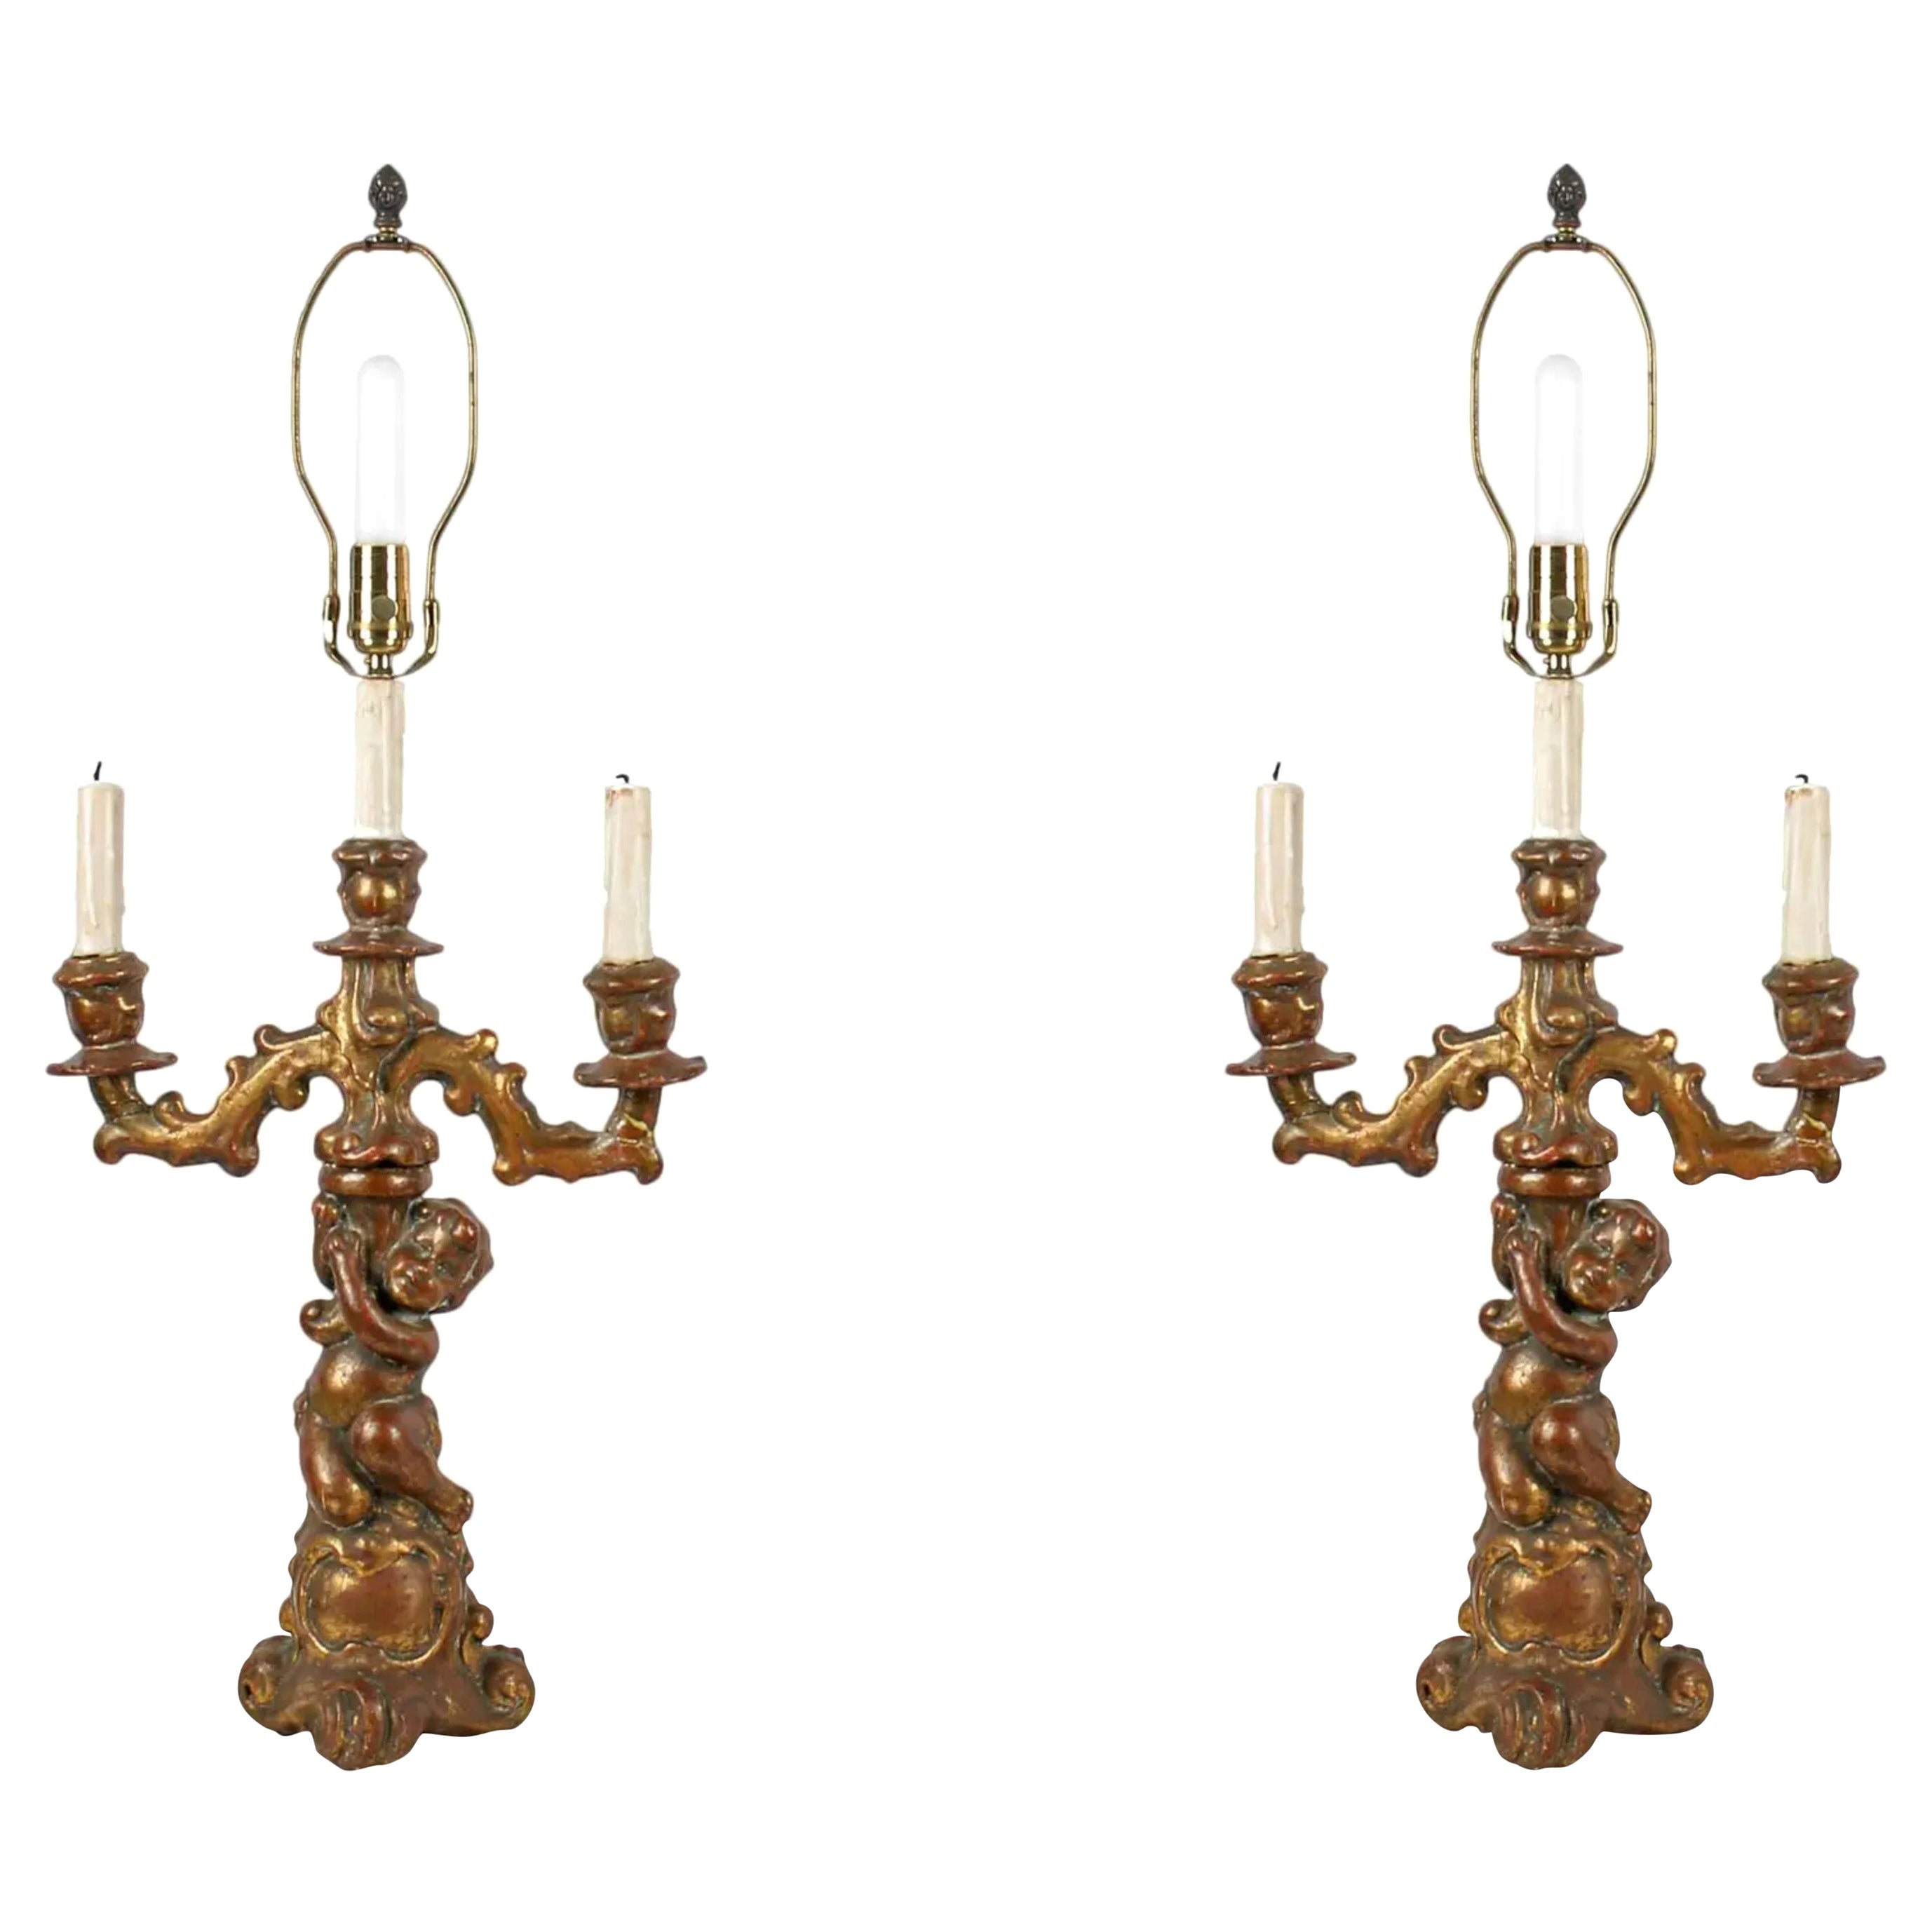 Pair of Antique Figural Nude Putti Gilt Wood Candelabra Table Lamp For Sale